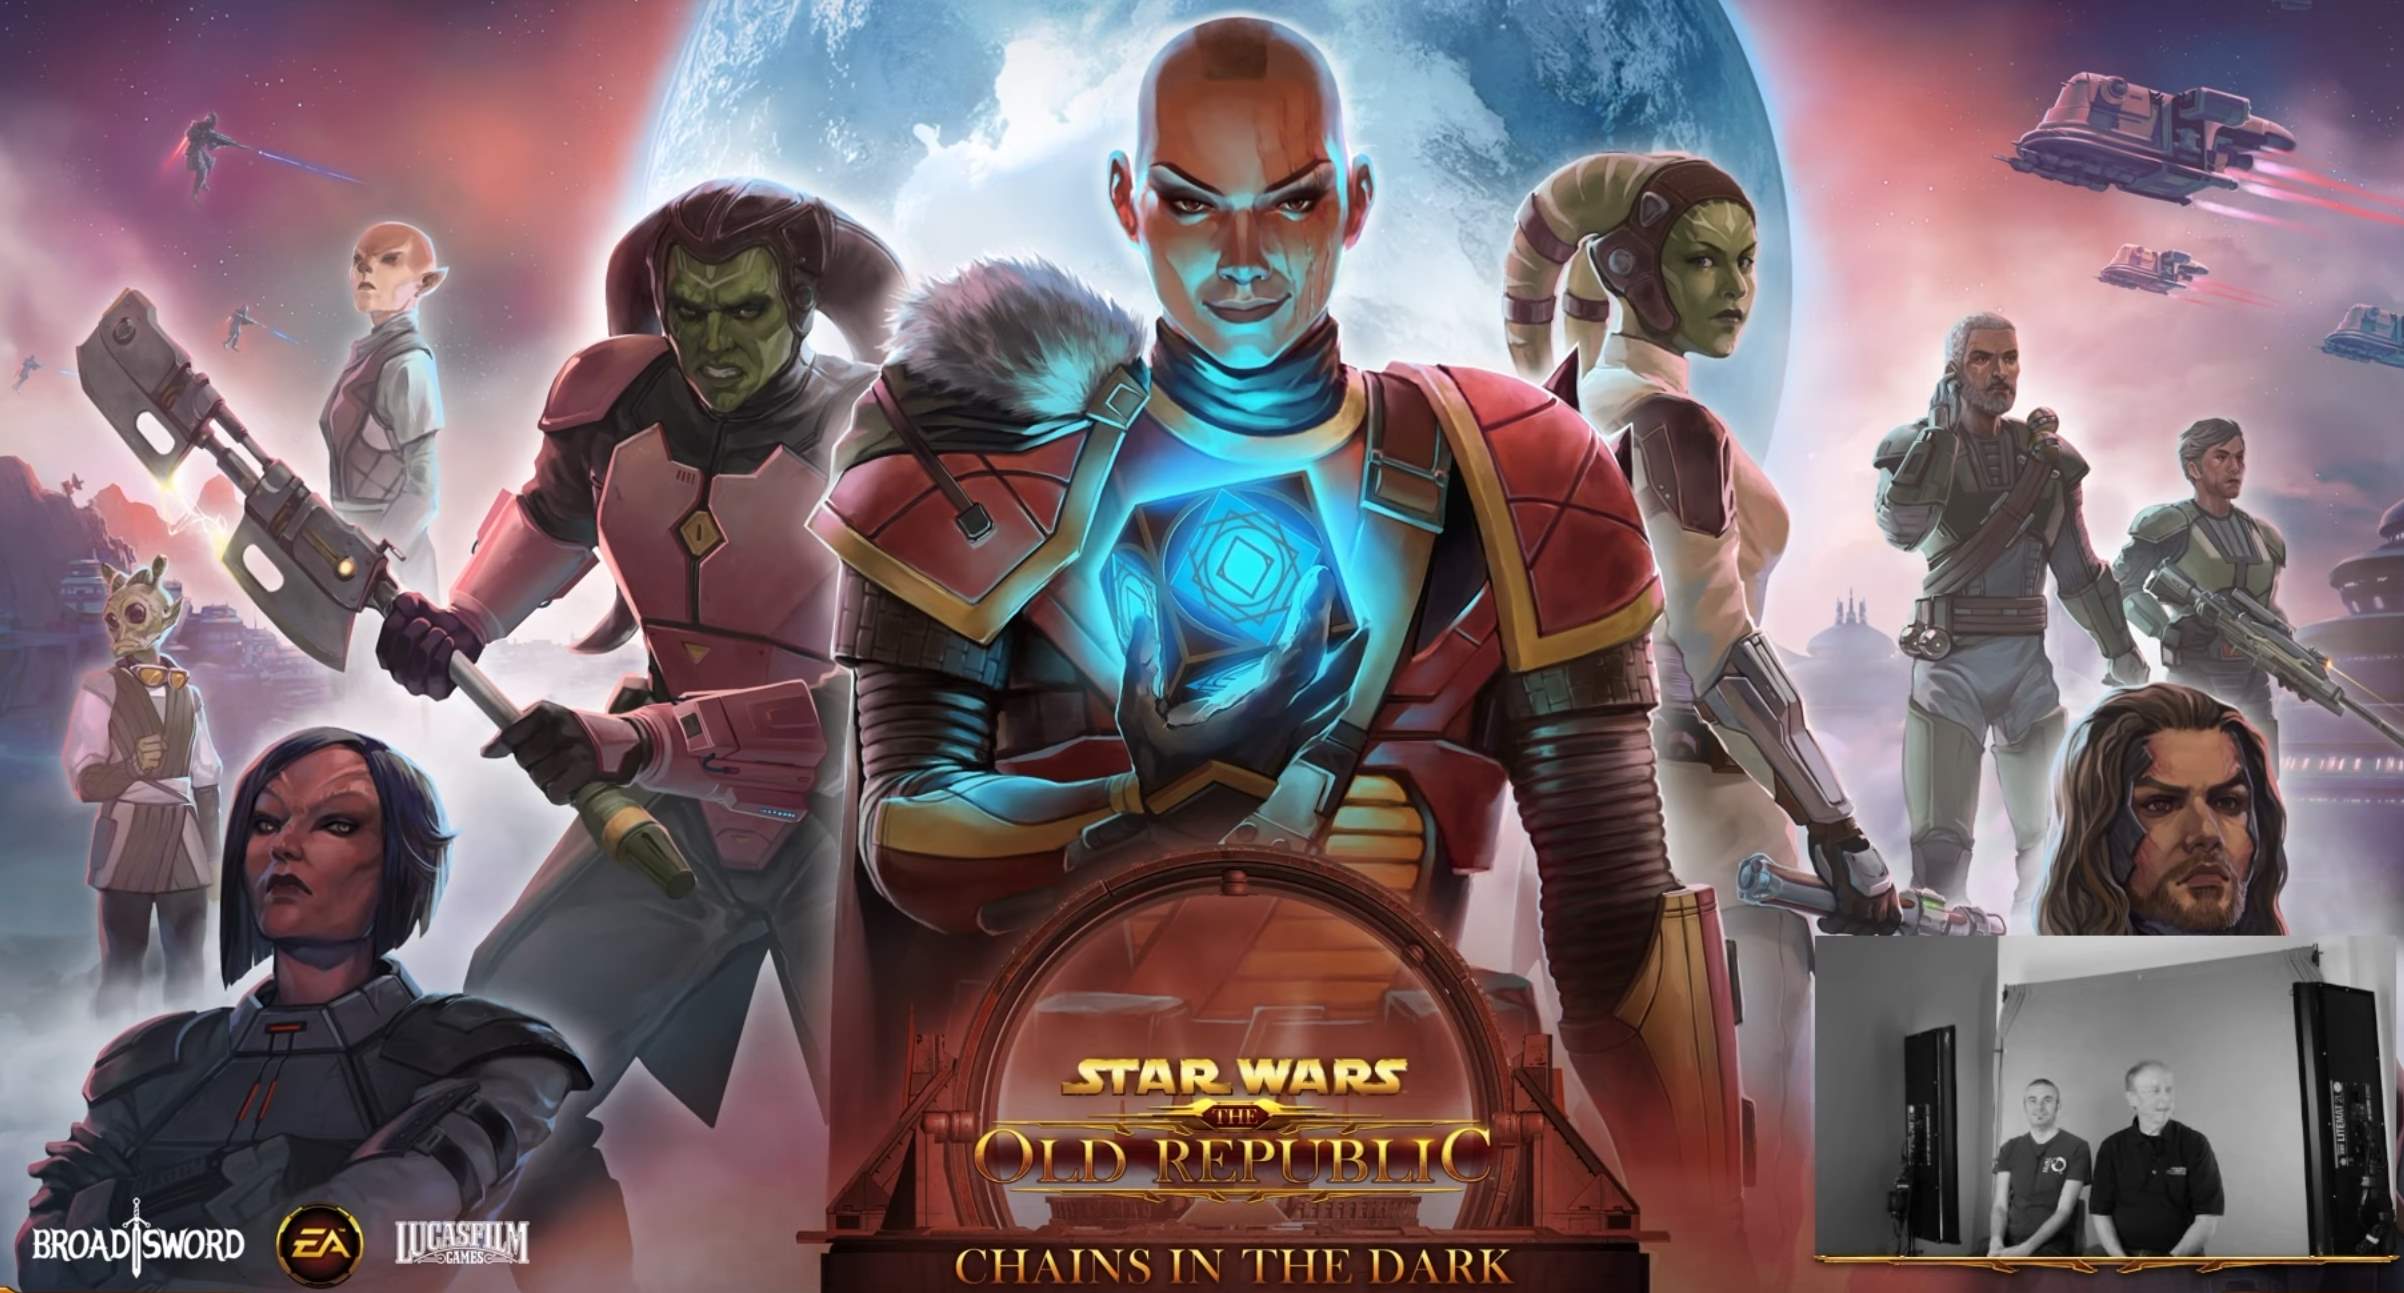 Star Wars: The Old Republic 7.4.1